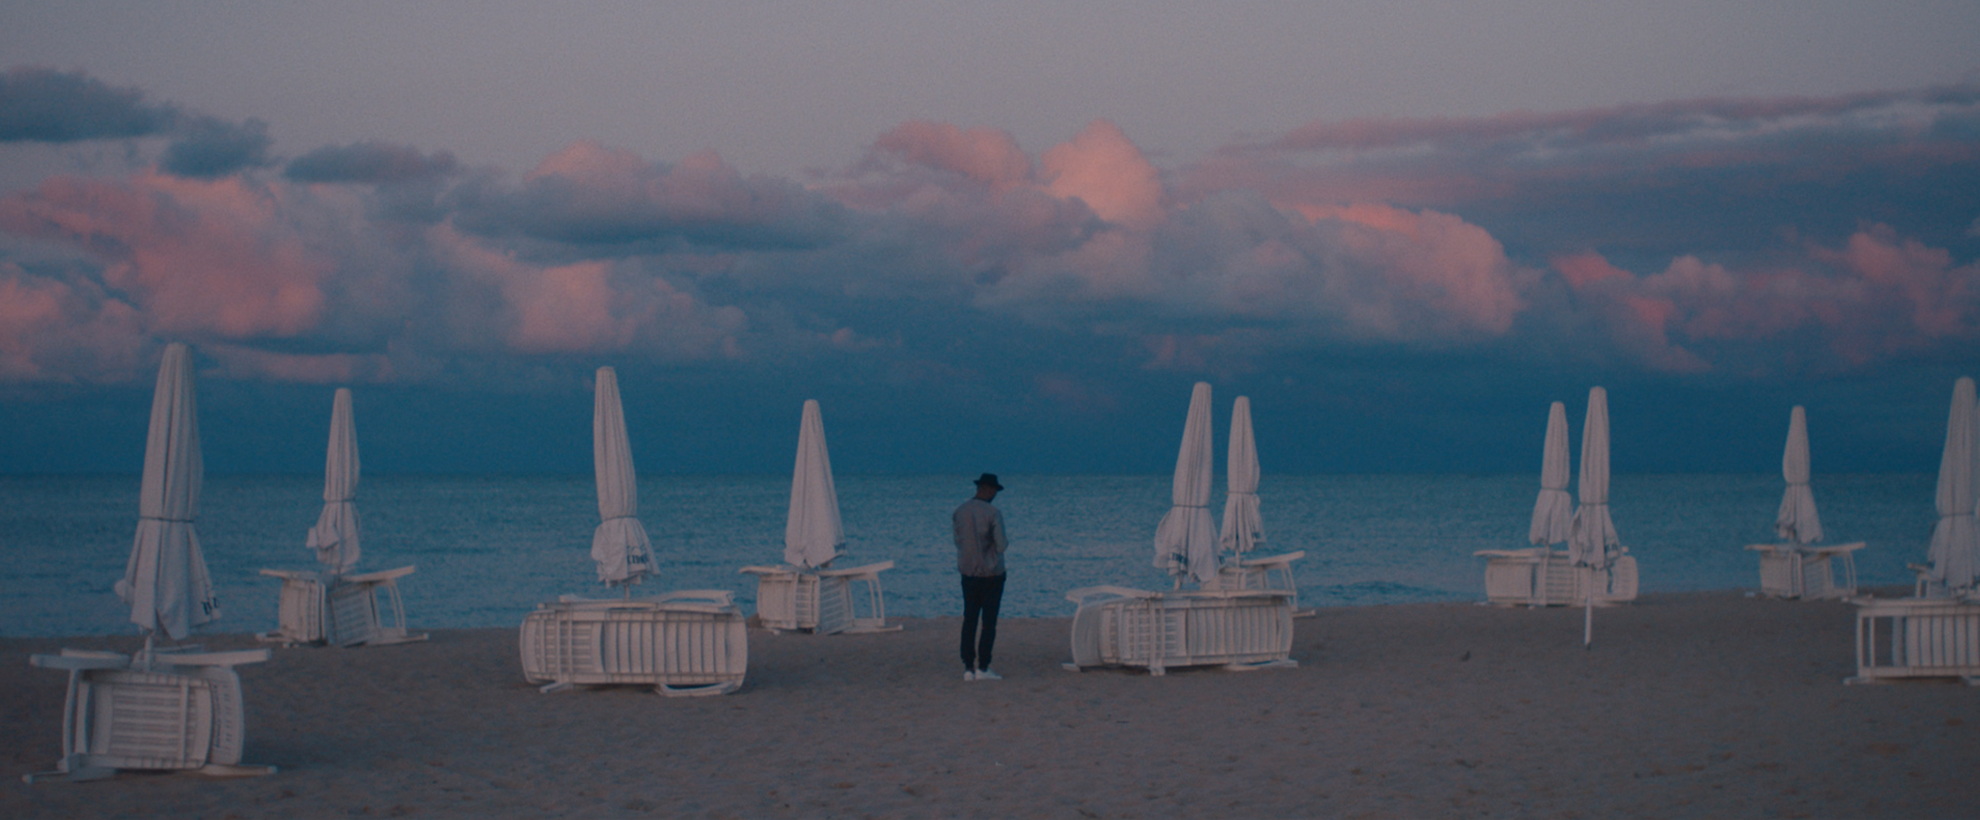 a person standing on the beach looking at the sea and mountains that are blankeed with pinky clouds. there are closed umbrellas and tables dotted around the beach